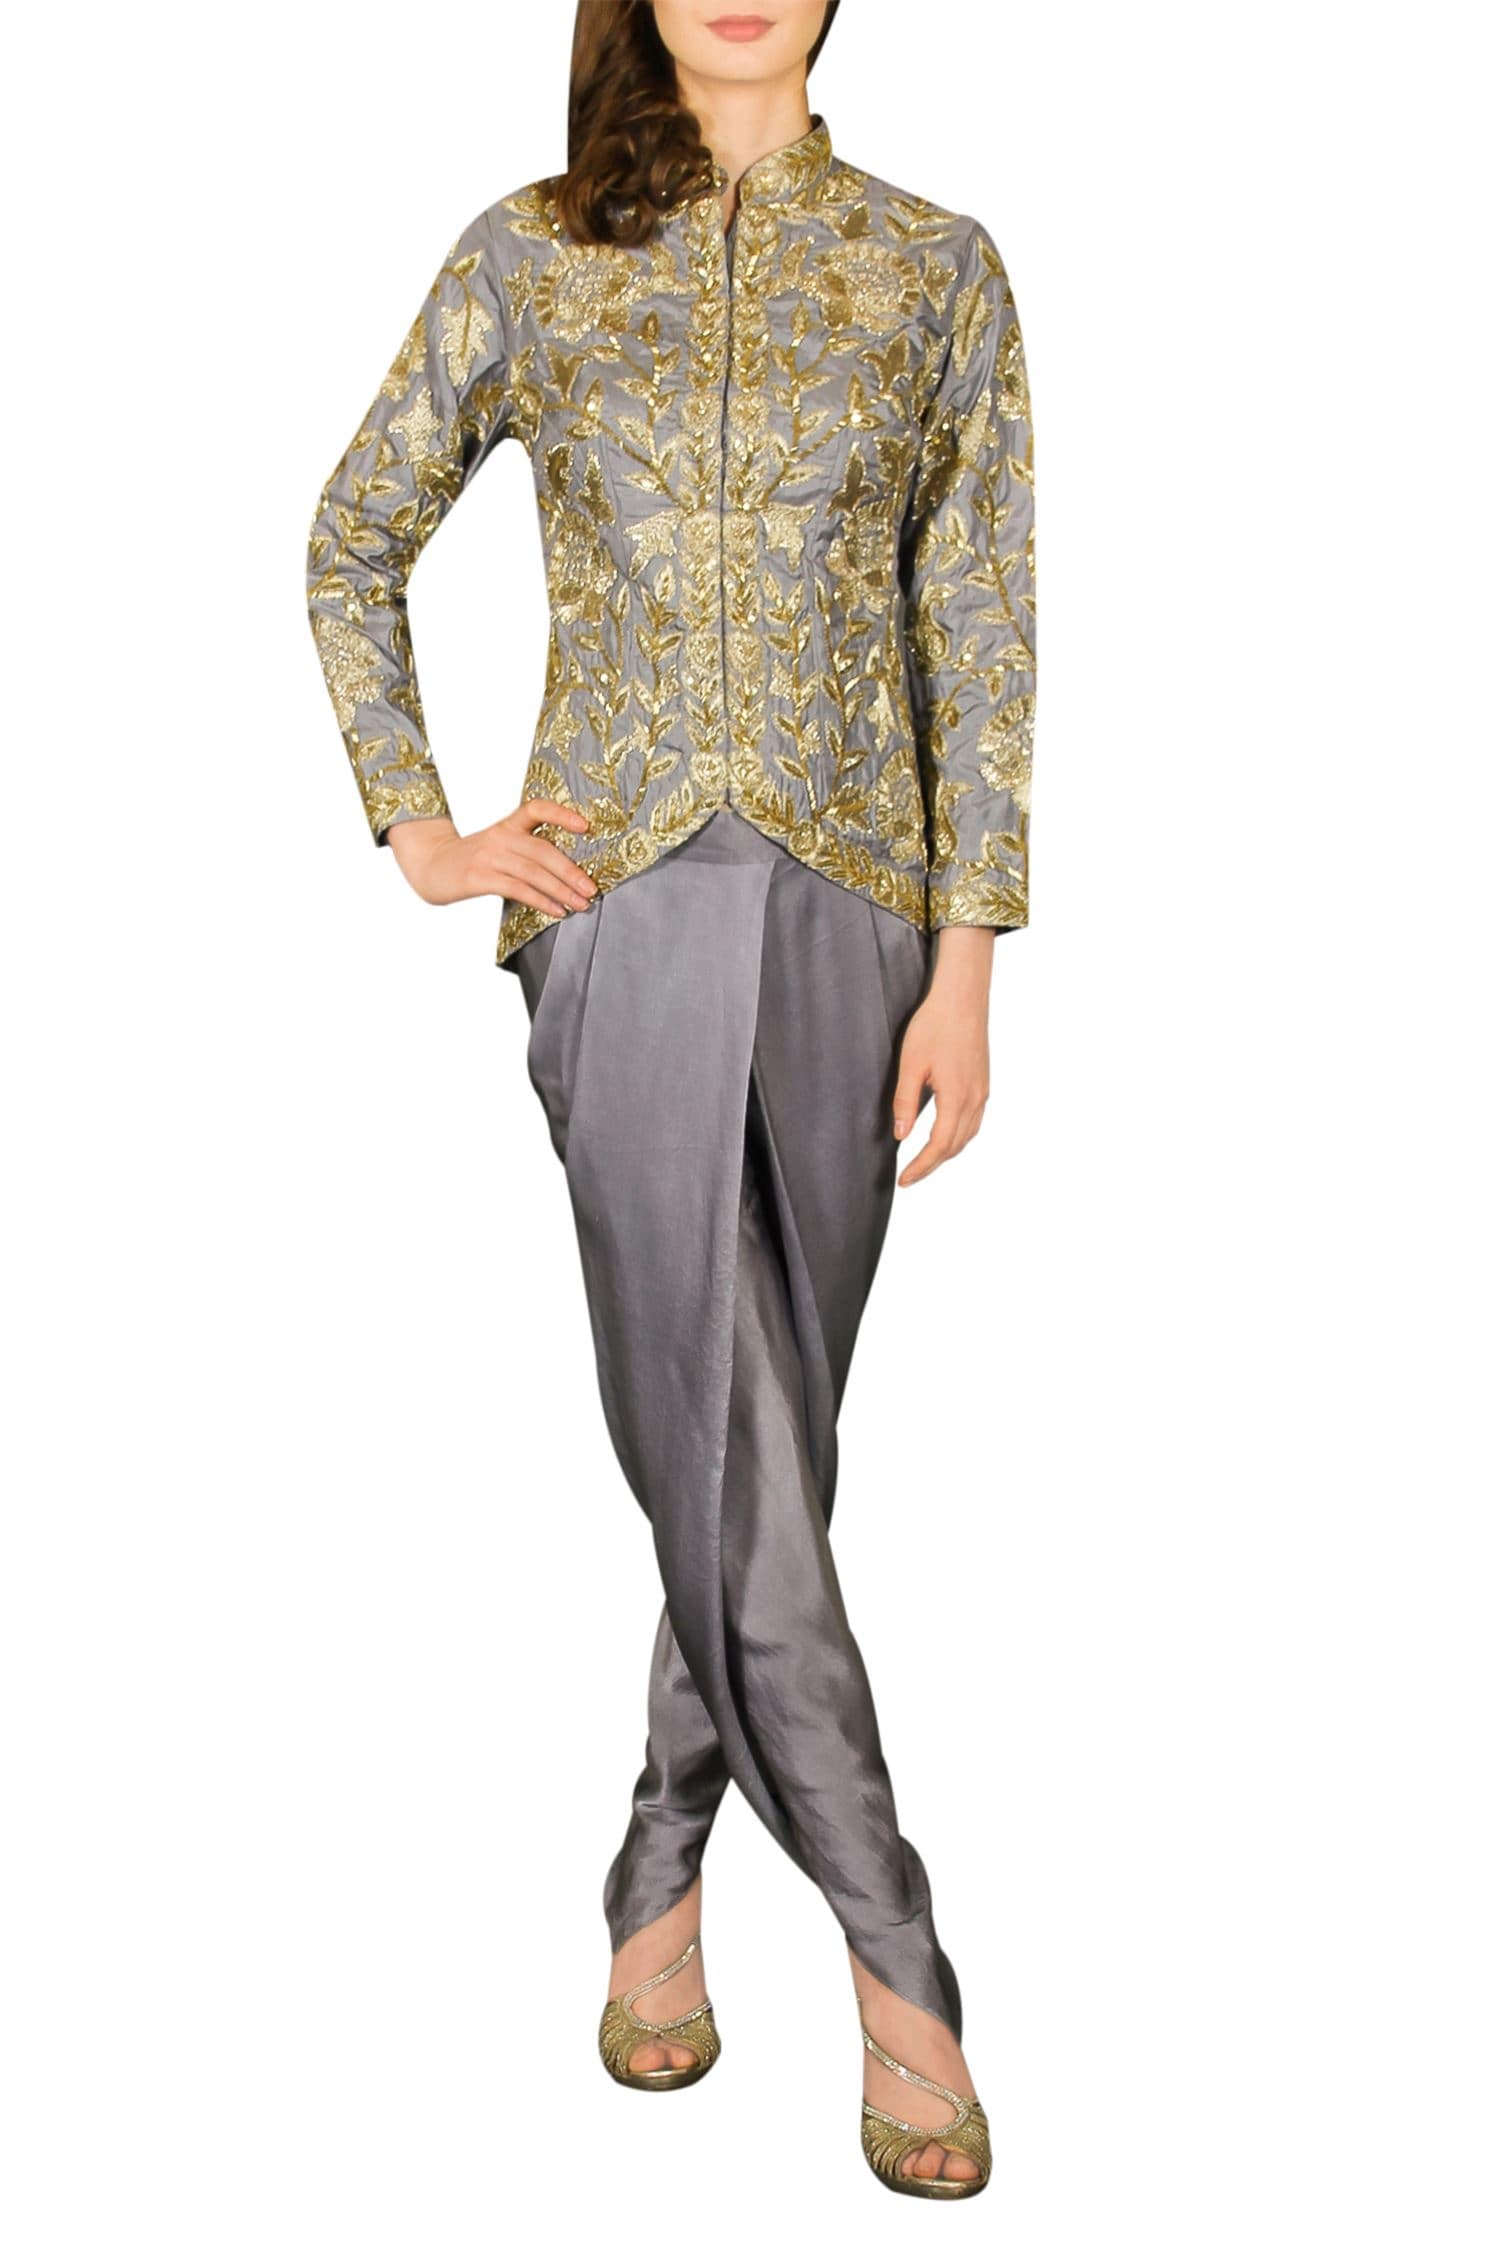 Chhavvi Aggarwal Grey Embroidered Jacket With Dhoti Pants